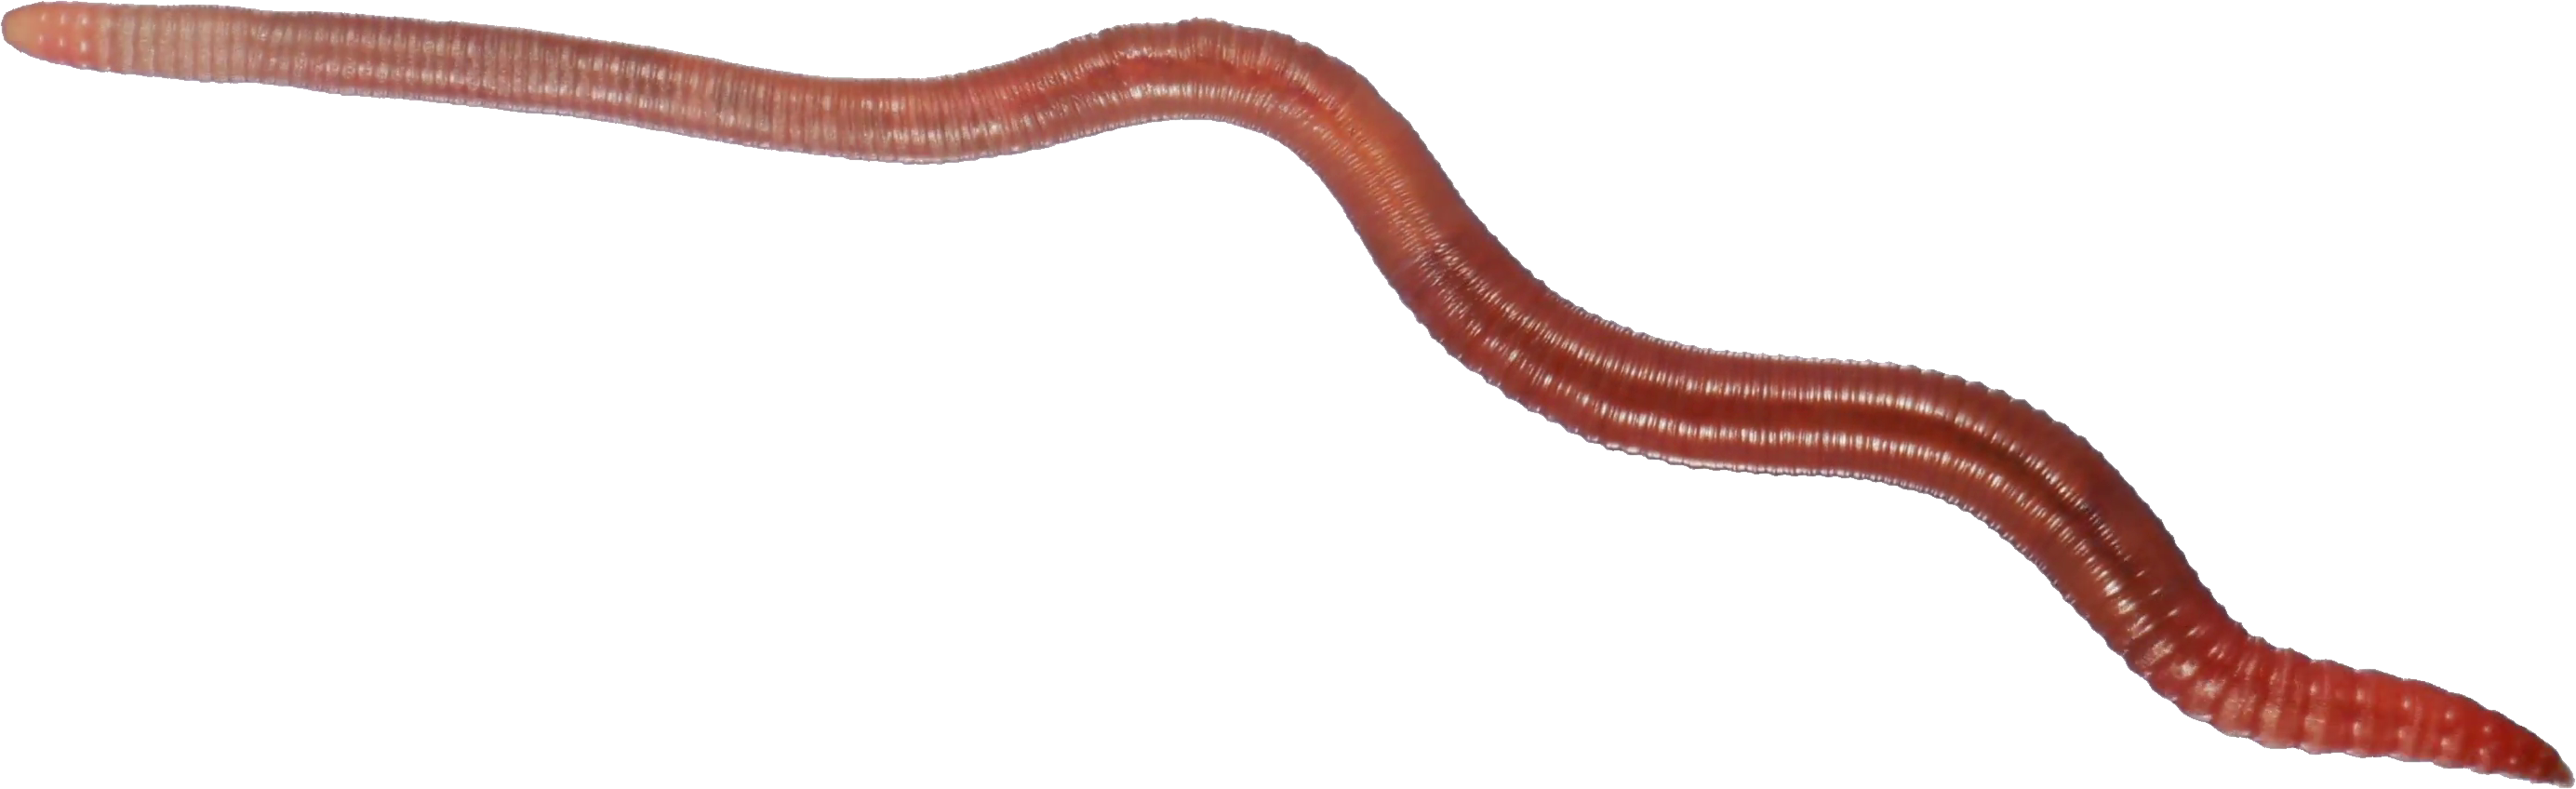 Worms png pic fundo